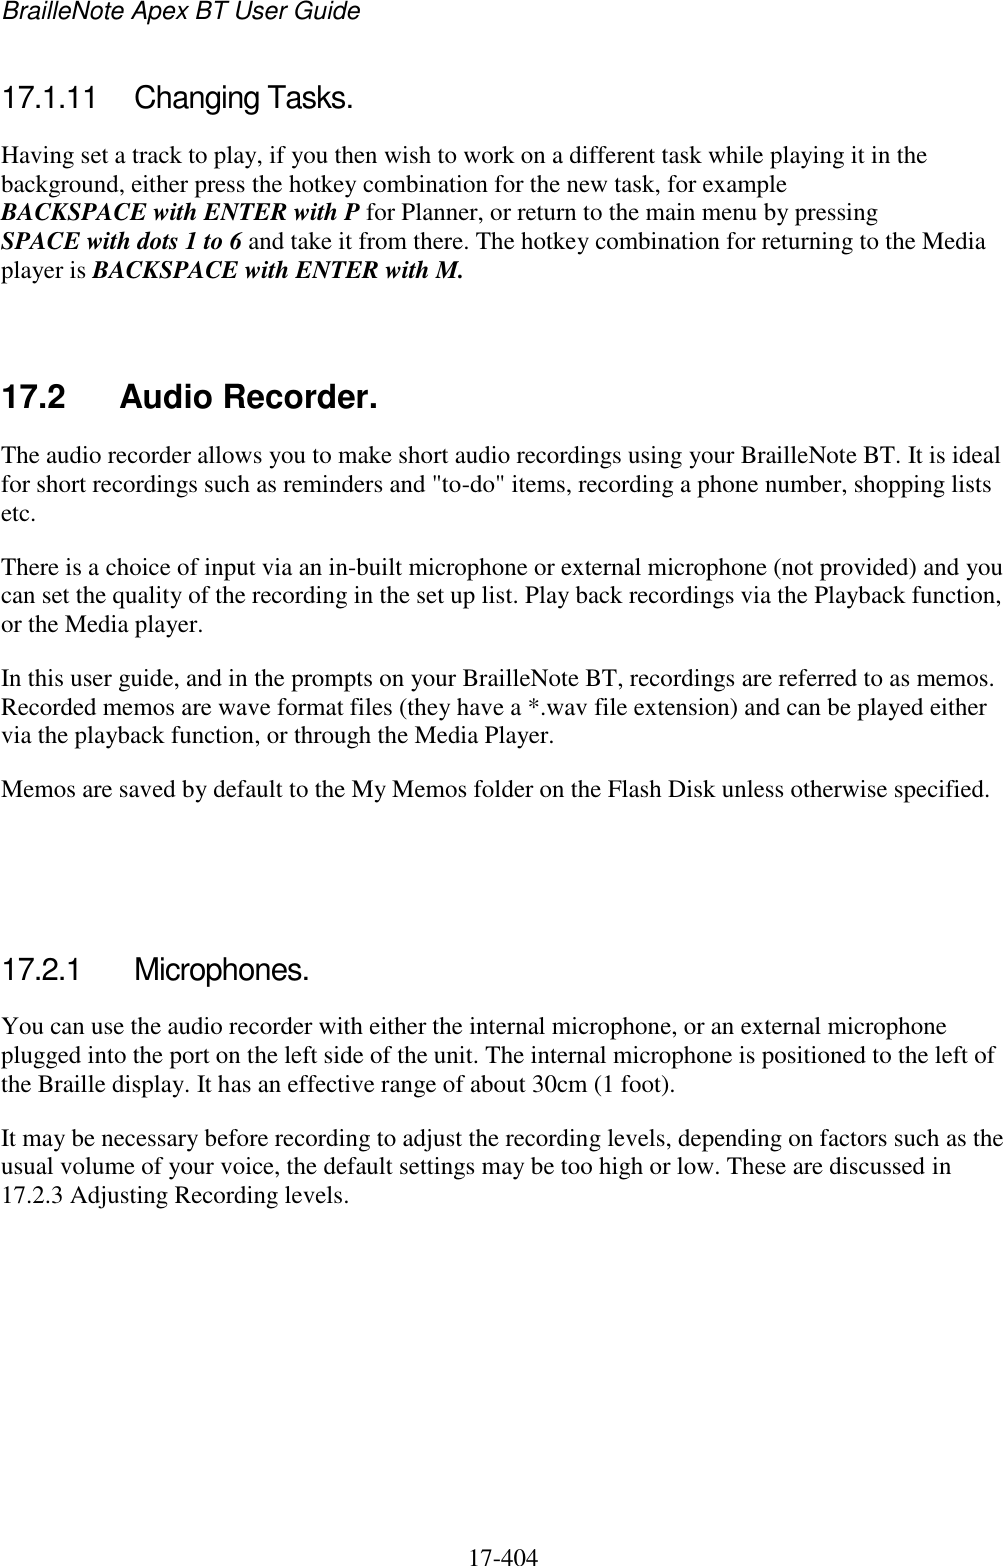 BrailleNote Apex BT User Guide   17-404   17.1.11  Changing Tasks. Having set a track to play, if you then wish to work on a different task while playing it in the background, either press the hotkey combination for the new task, for example BACKSPACE with ENTER with P for Planner, or return to the main menu by pressing SPACE with dots 1 to 6 and take it from there. The hotkey combination for returning to the Media player is BACKSPACE with ENTER with M.   17.2  Audio Recorder. The audio recorder allows you to make short audio recordings using your BrailleNote BT. It is ideal for short recordings such as reminders and &quot;to-do&quot; items, recording a phone number, shopping lists etc. There is a choice of input via an in-built microphone or external microphone (not provided) and you can set the quality of the recording in the set up list. Play back recordings via the Playback function, or the Media player. In this user guide, and in the prompts on your BrailleNote BT, recordings are referred to as memos. Recorded memos are wave format files (they have a *.wav file extension) and can be played either via the playback function, or through the Media Player. Memos are saved by default to the My Memos folder on the Flash Disk unless otherwise specified.    17.2.1  Microphones. You can use the audio recorder with either the internal microphone, or an external microphone plugged into the port on the left side of the unit. The internal microphone is positioned to the left of the Braille display. It has an effective range of about 30cm (1 foot). It may be necessary before recording to adjust the recording levels, depending on factors such as the usual volume of your voice, the default settings may be too high or low. These are discussed in 17.2.3 Adjusting Recording levels.   